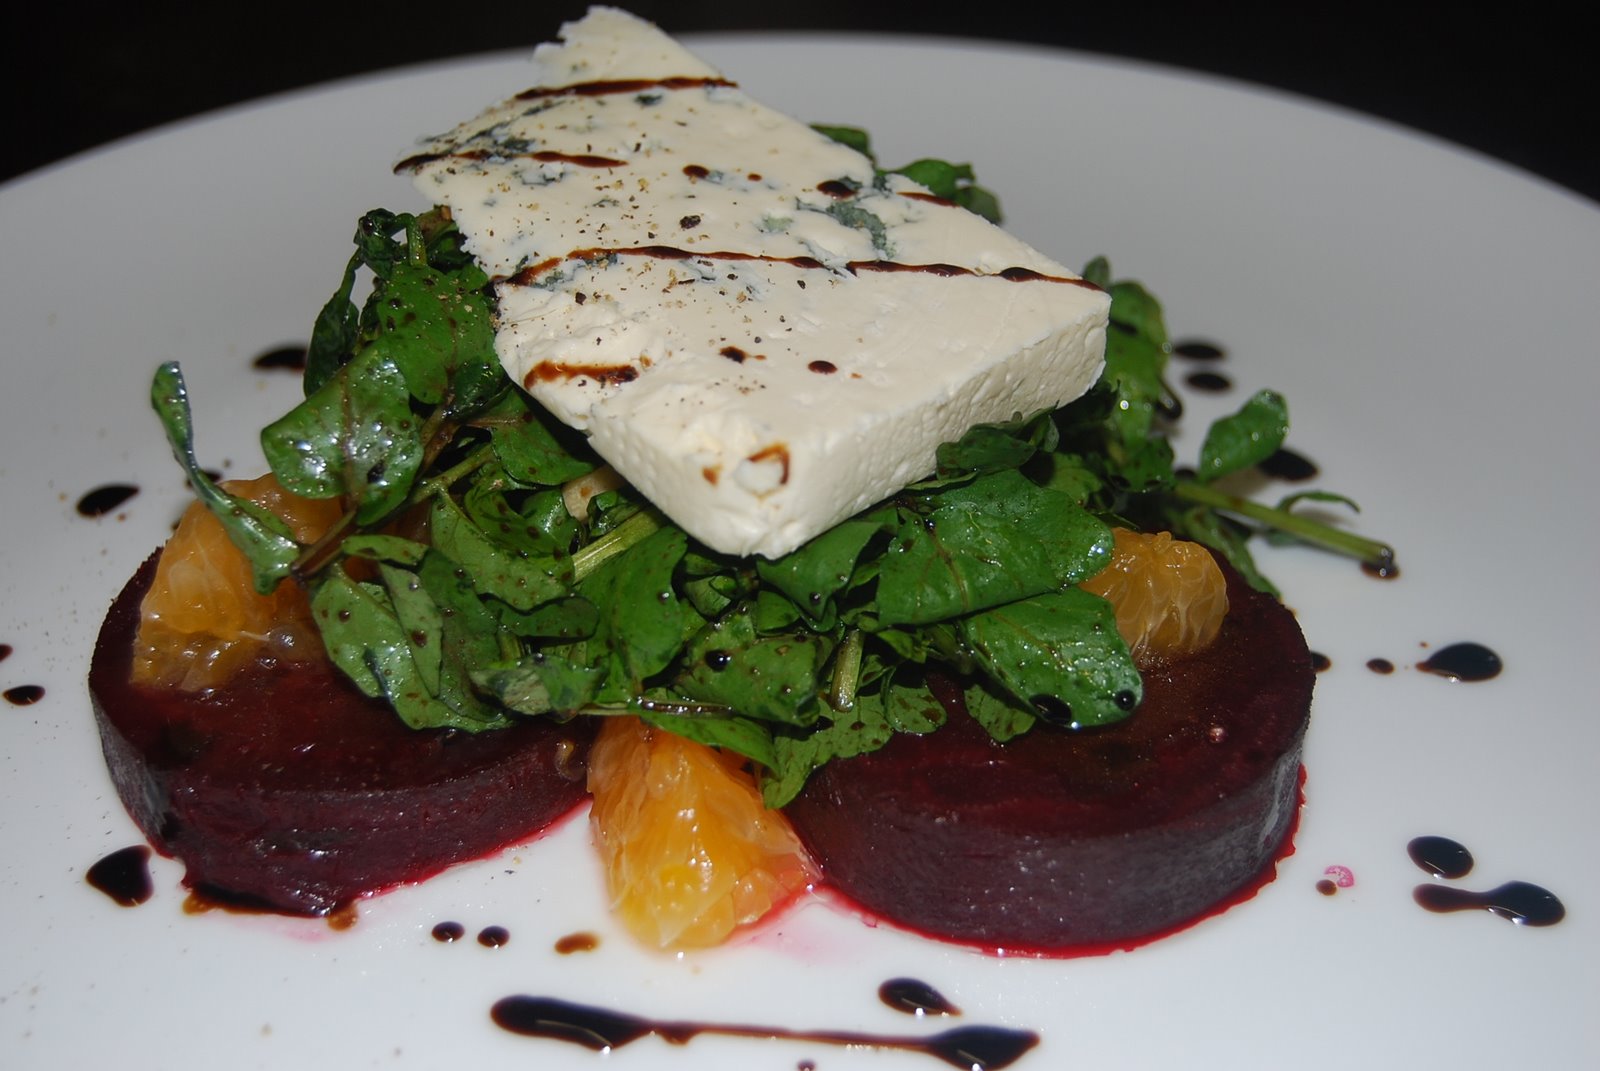 [oven-roasted+red+beets+with+mild+blue+cheese,+mandarin+segments,+and+watercress+salad.JPG]